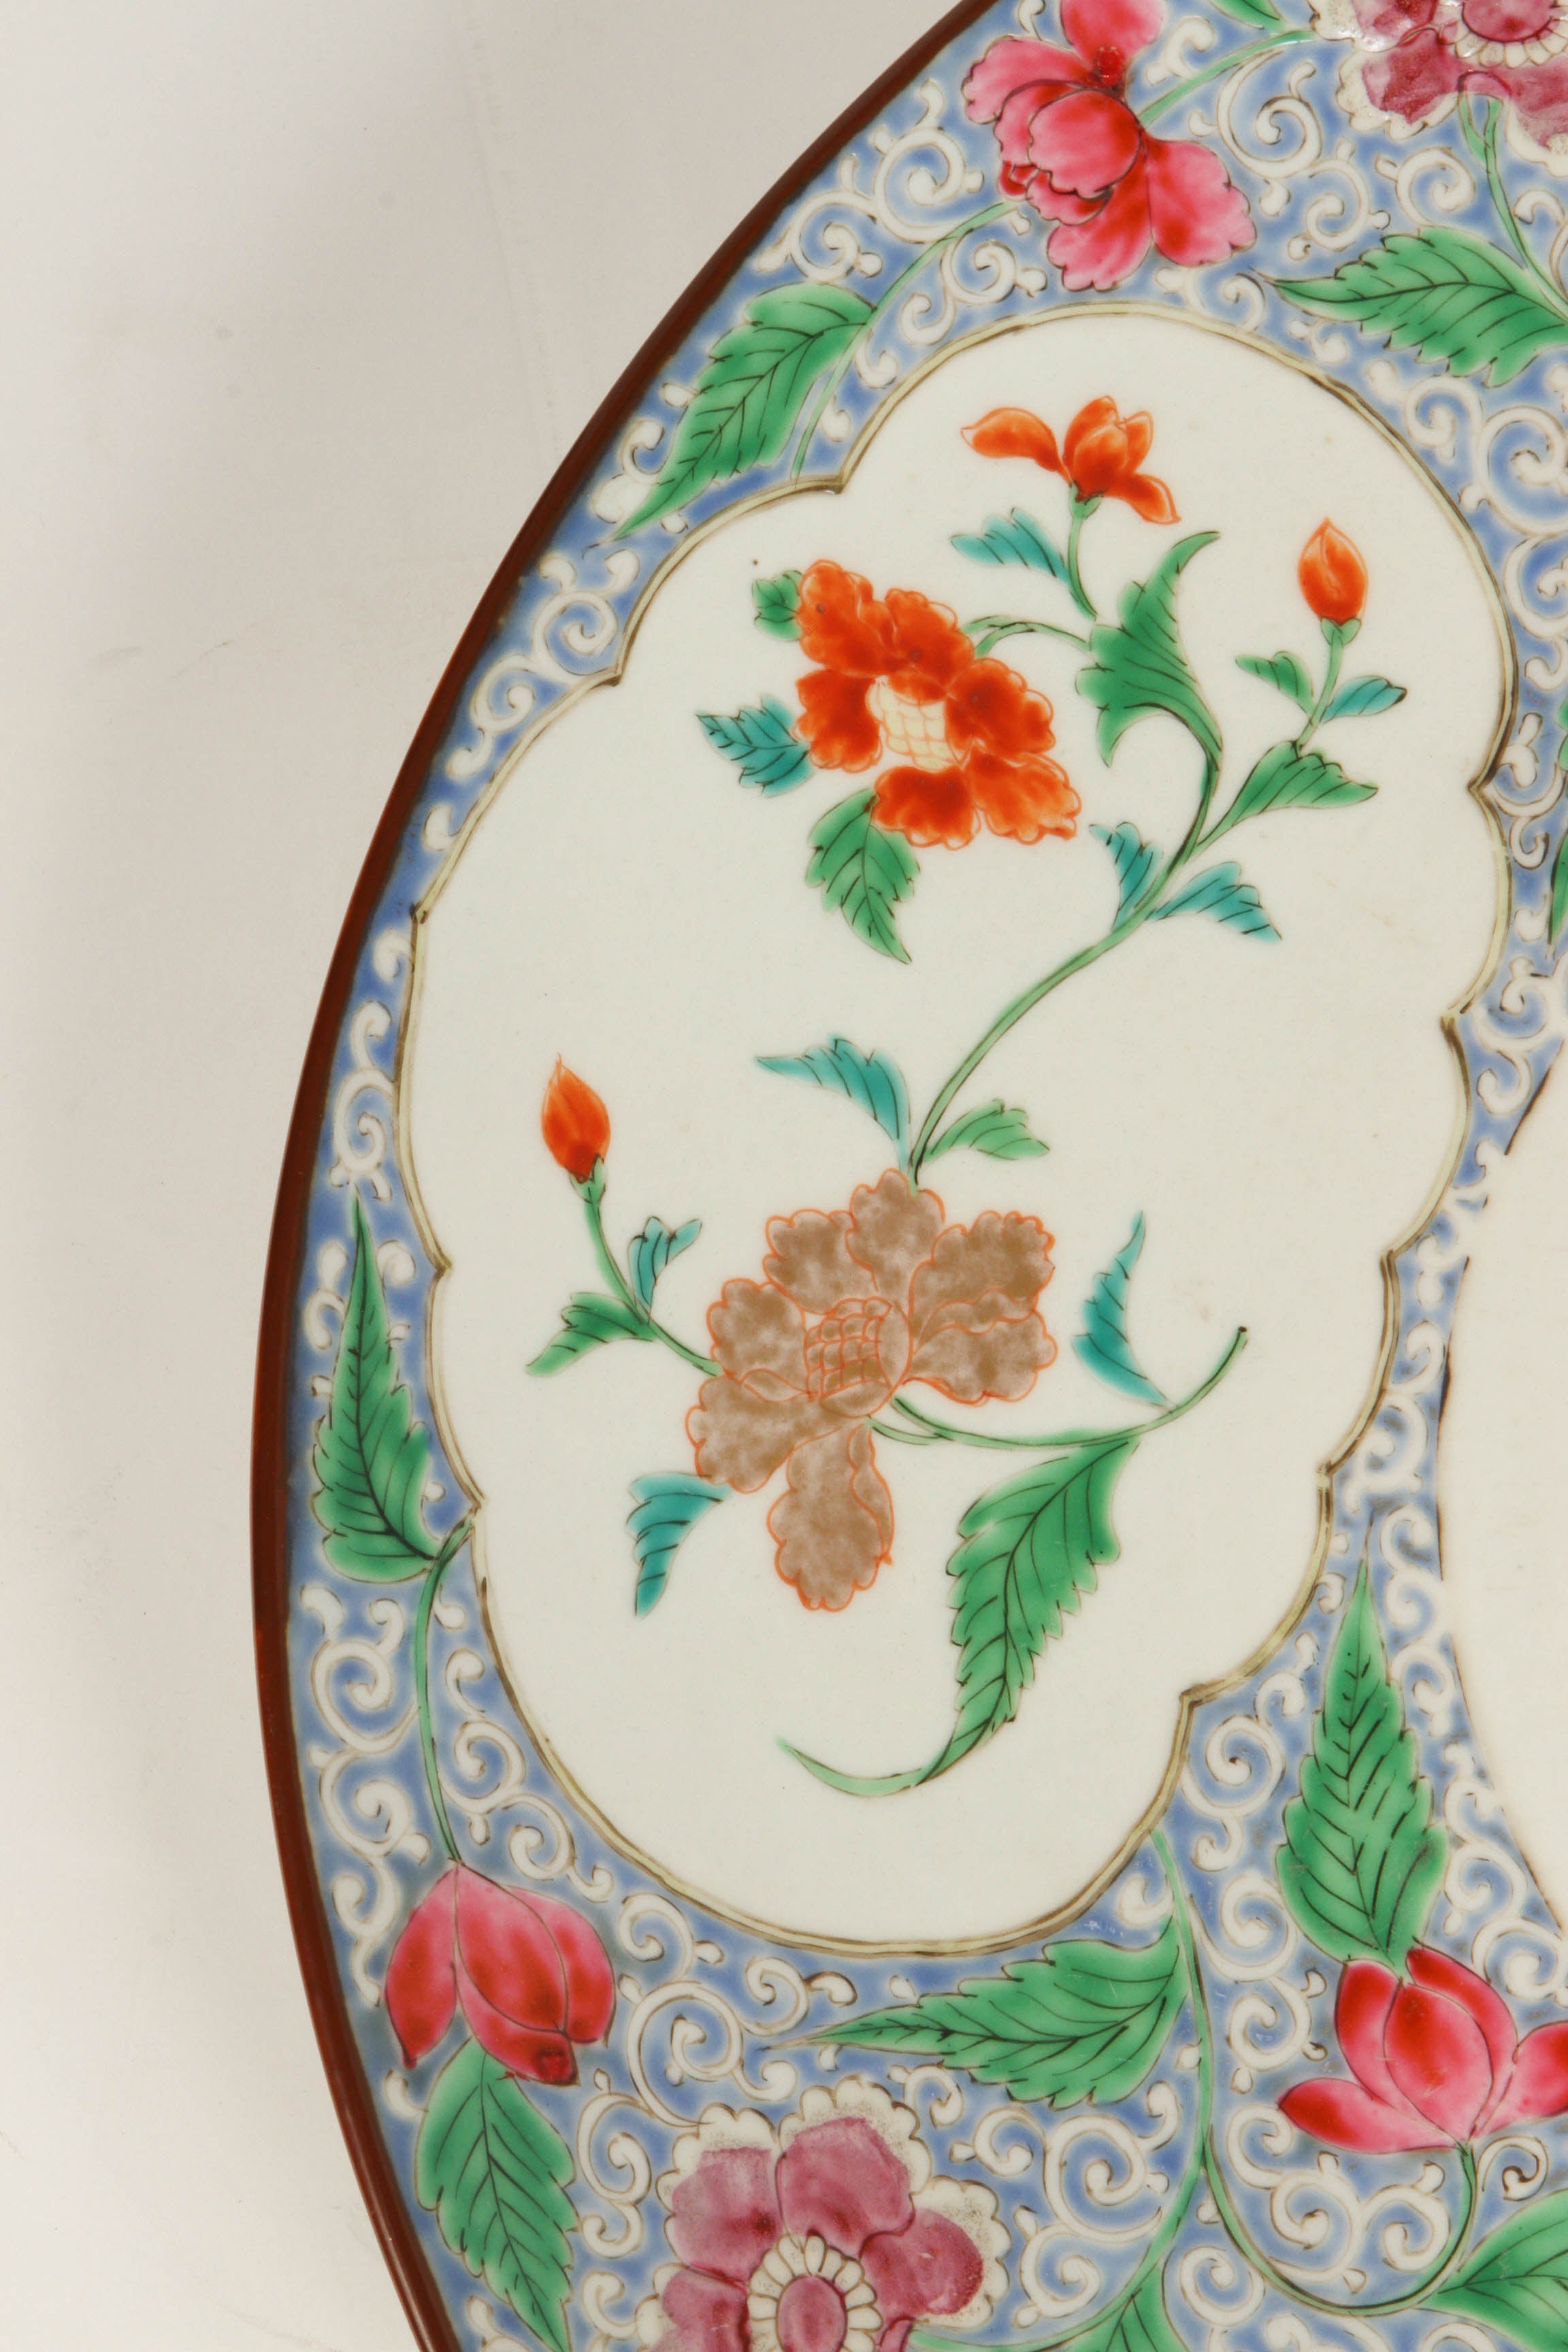 Large 19th Century Porcelain Charger, Signed Malaysian Export In Excellent Condition For Sale In Pasadena, CA